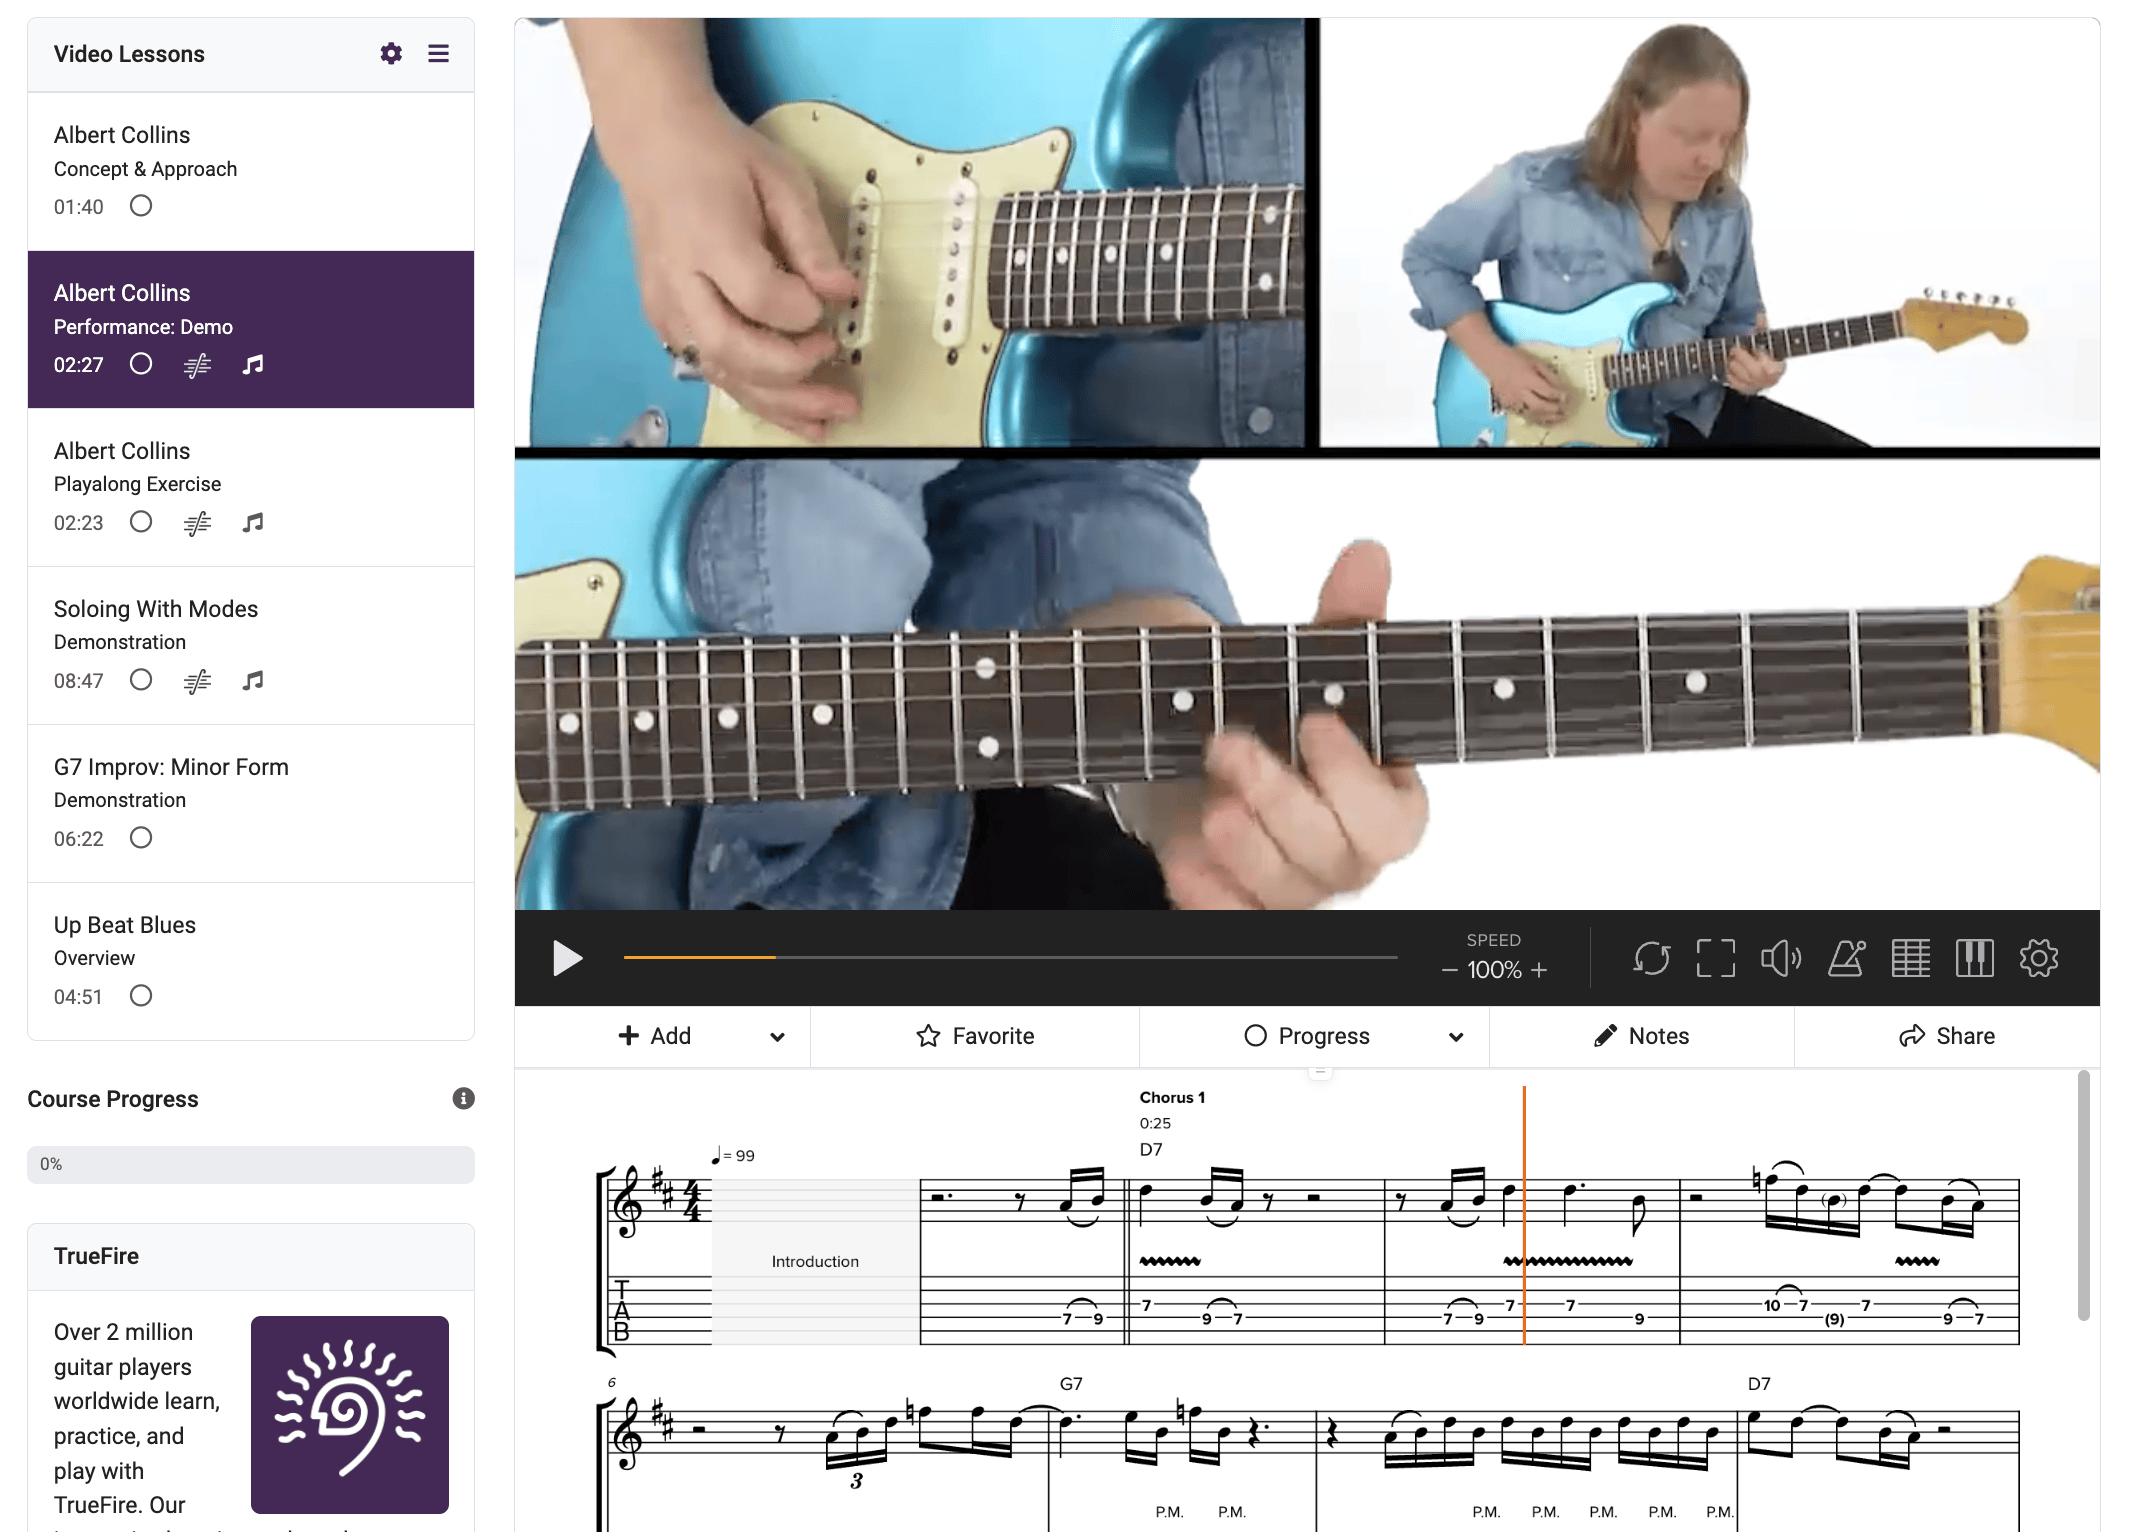 TrueFire's users interface is great for learning the guitar.